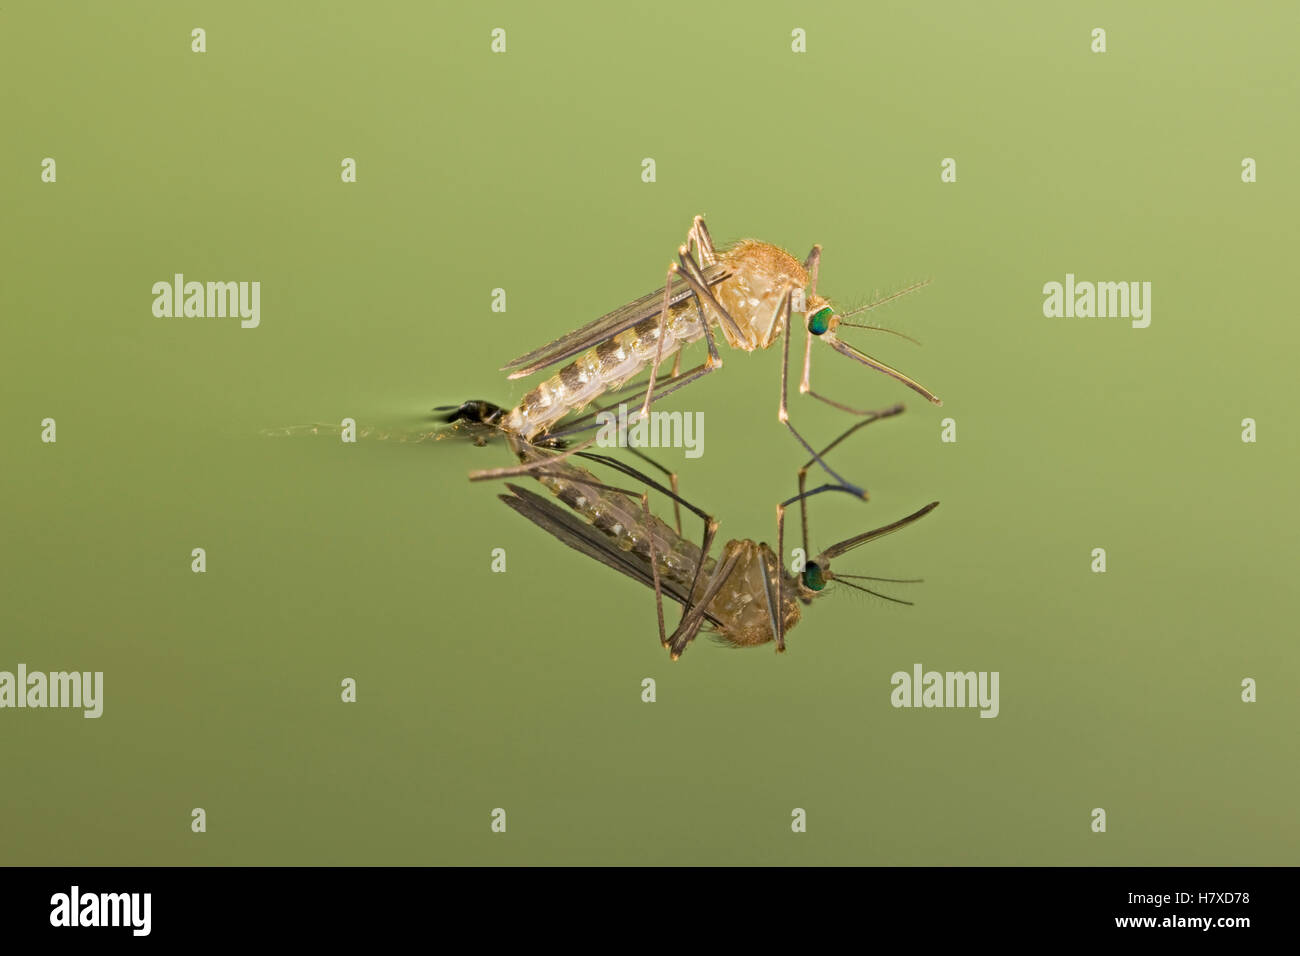 Mosquito (Culicidae) hatching from larval case, Germany Stock Photo